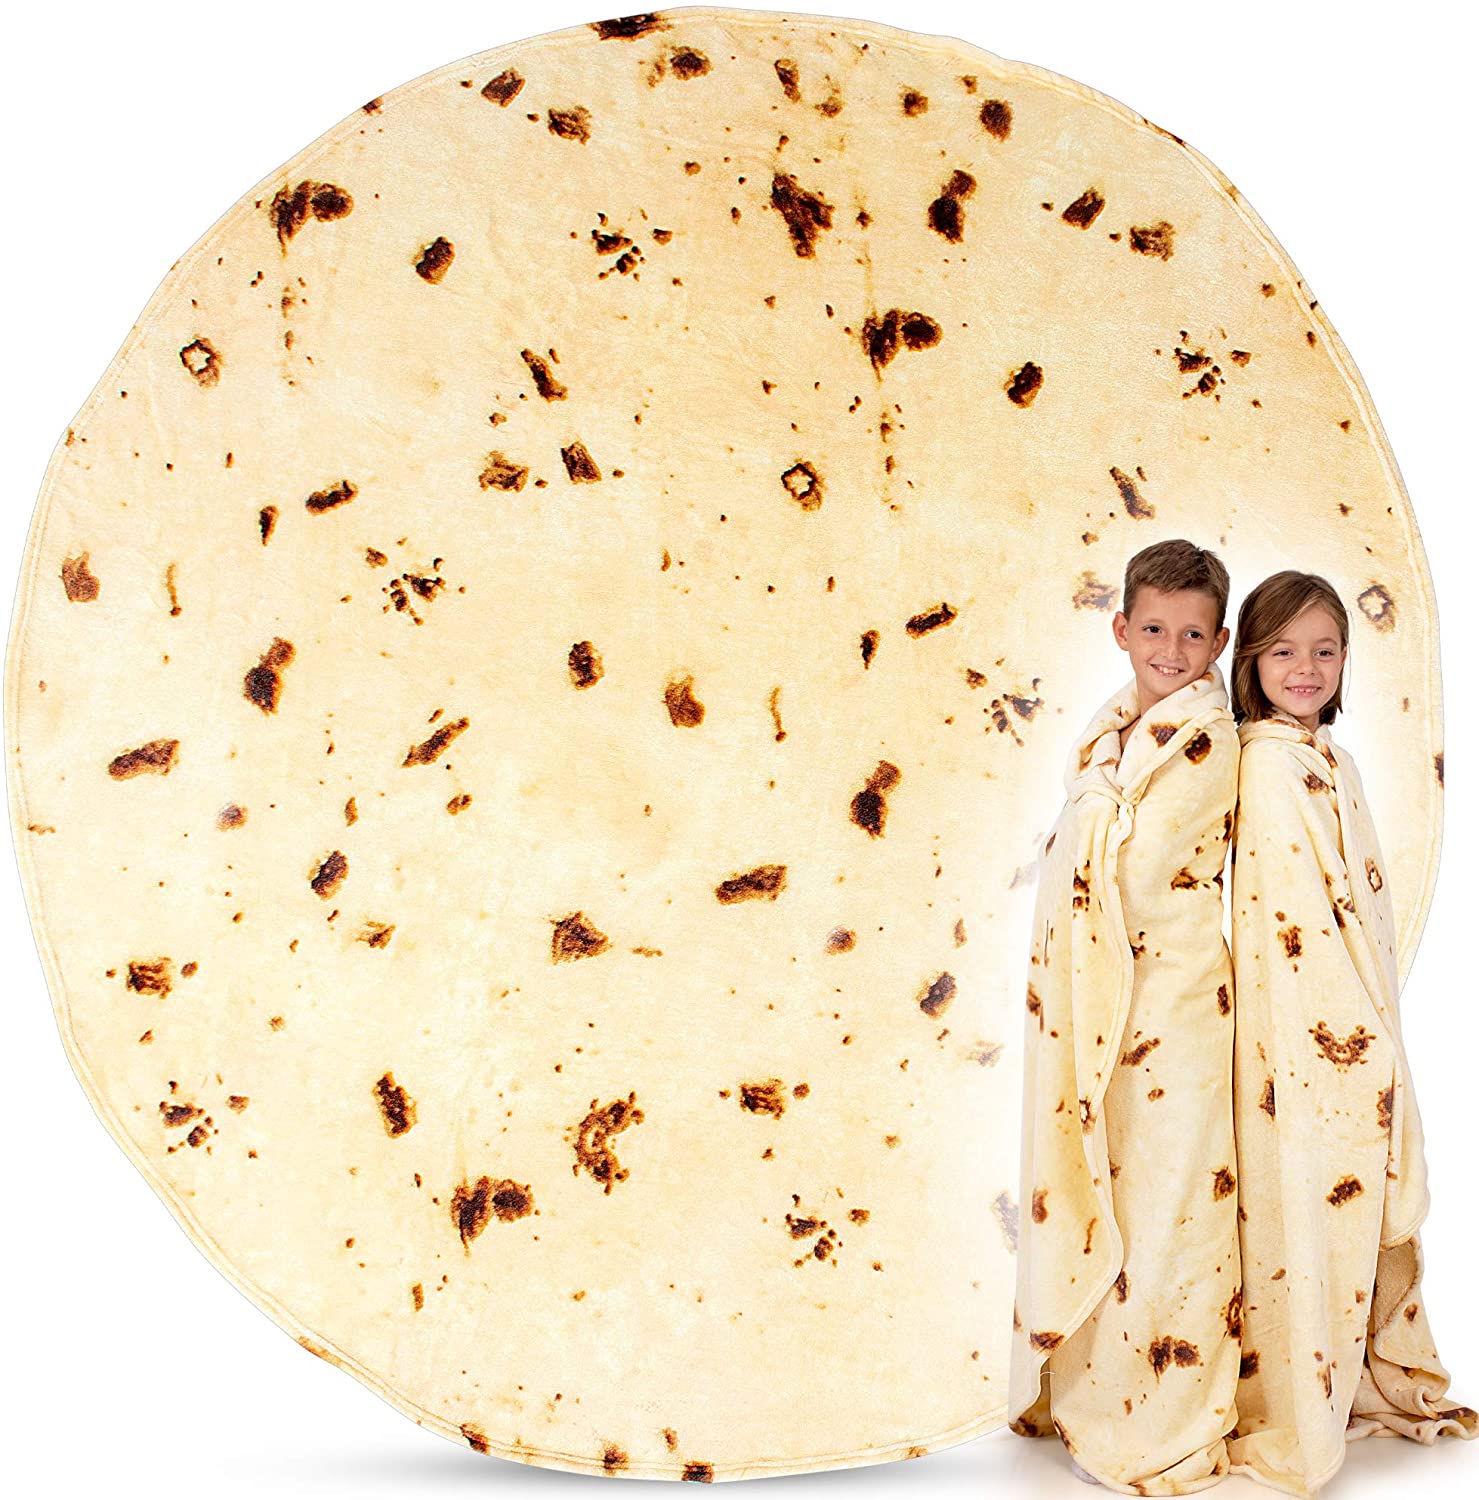 Simple Craft (60 Inch) Tortilla Giant Tortilla Blanket For Adults & Kids - Throw Blanket - For Indoors, Outdoors & More from Zulay Kitchen